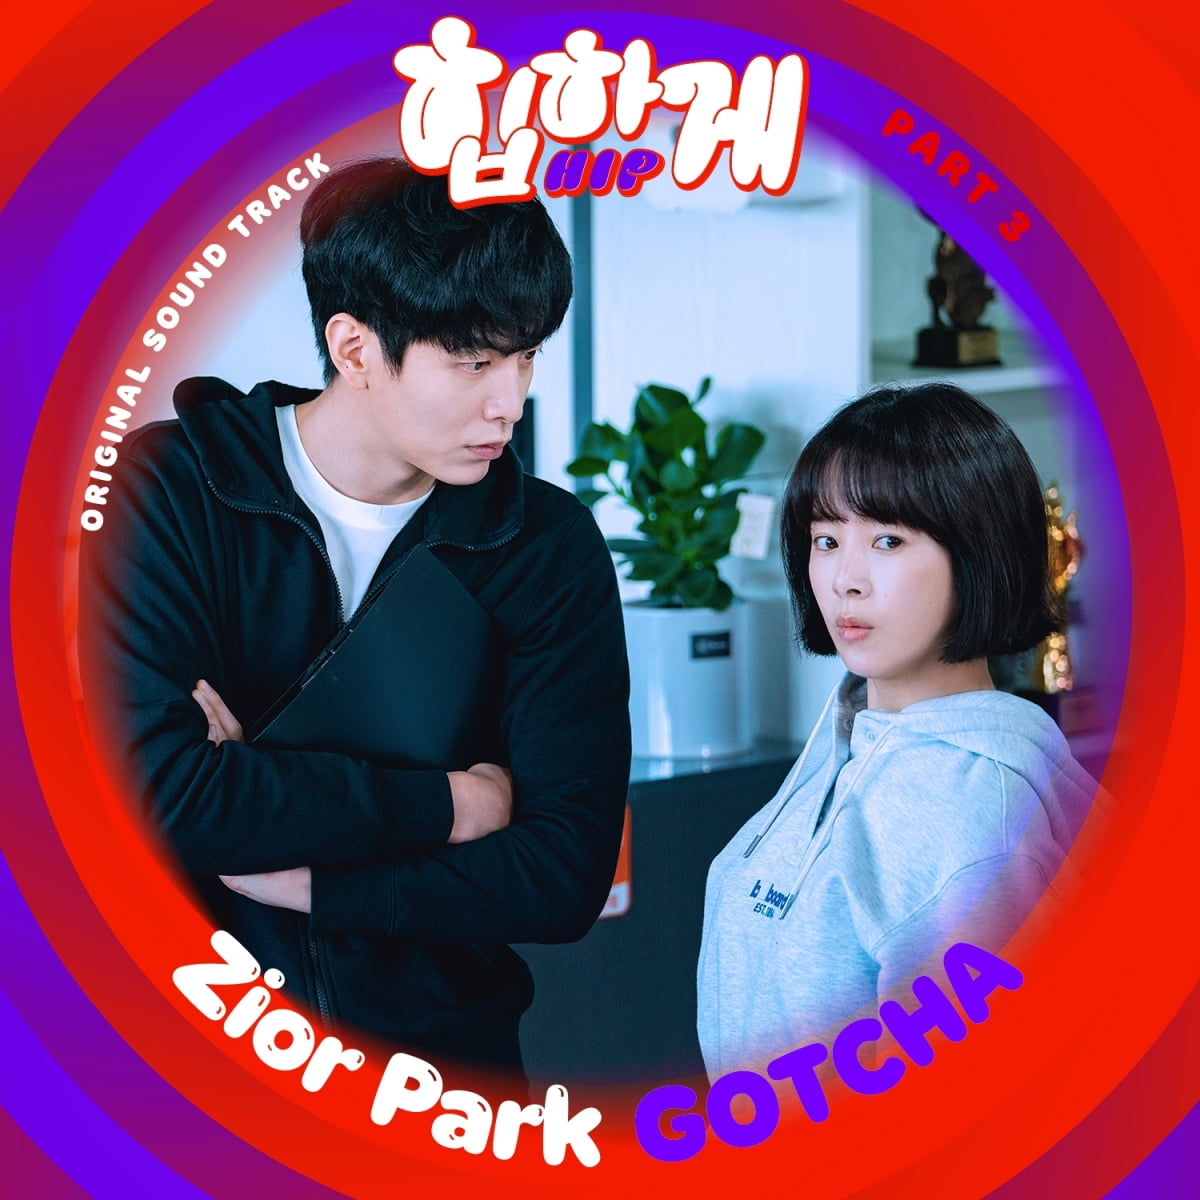 Drama 'Behind your touch', 3rd OST Zior Park's 'GOTCHA' released today (27th)